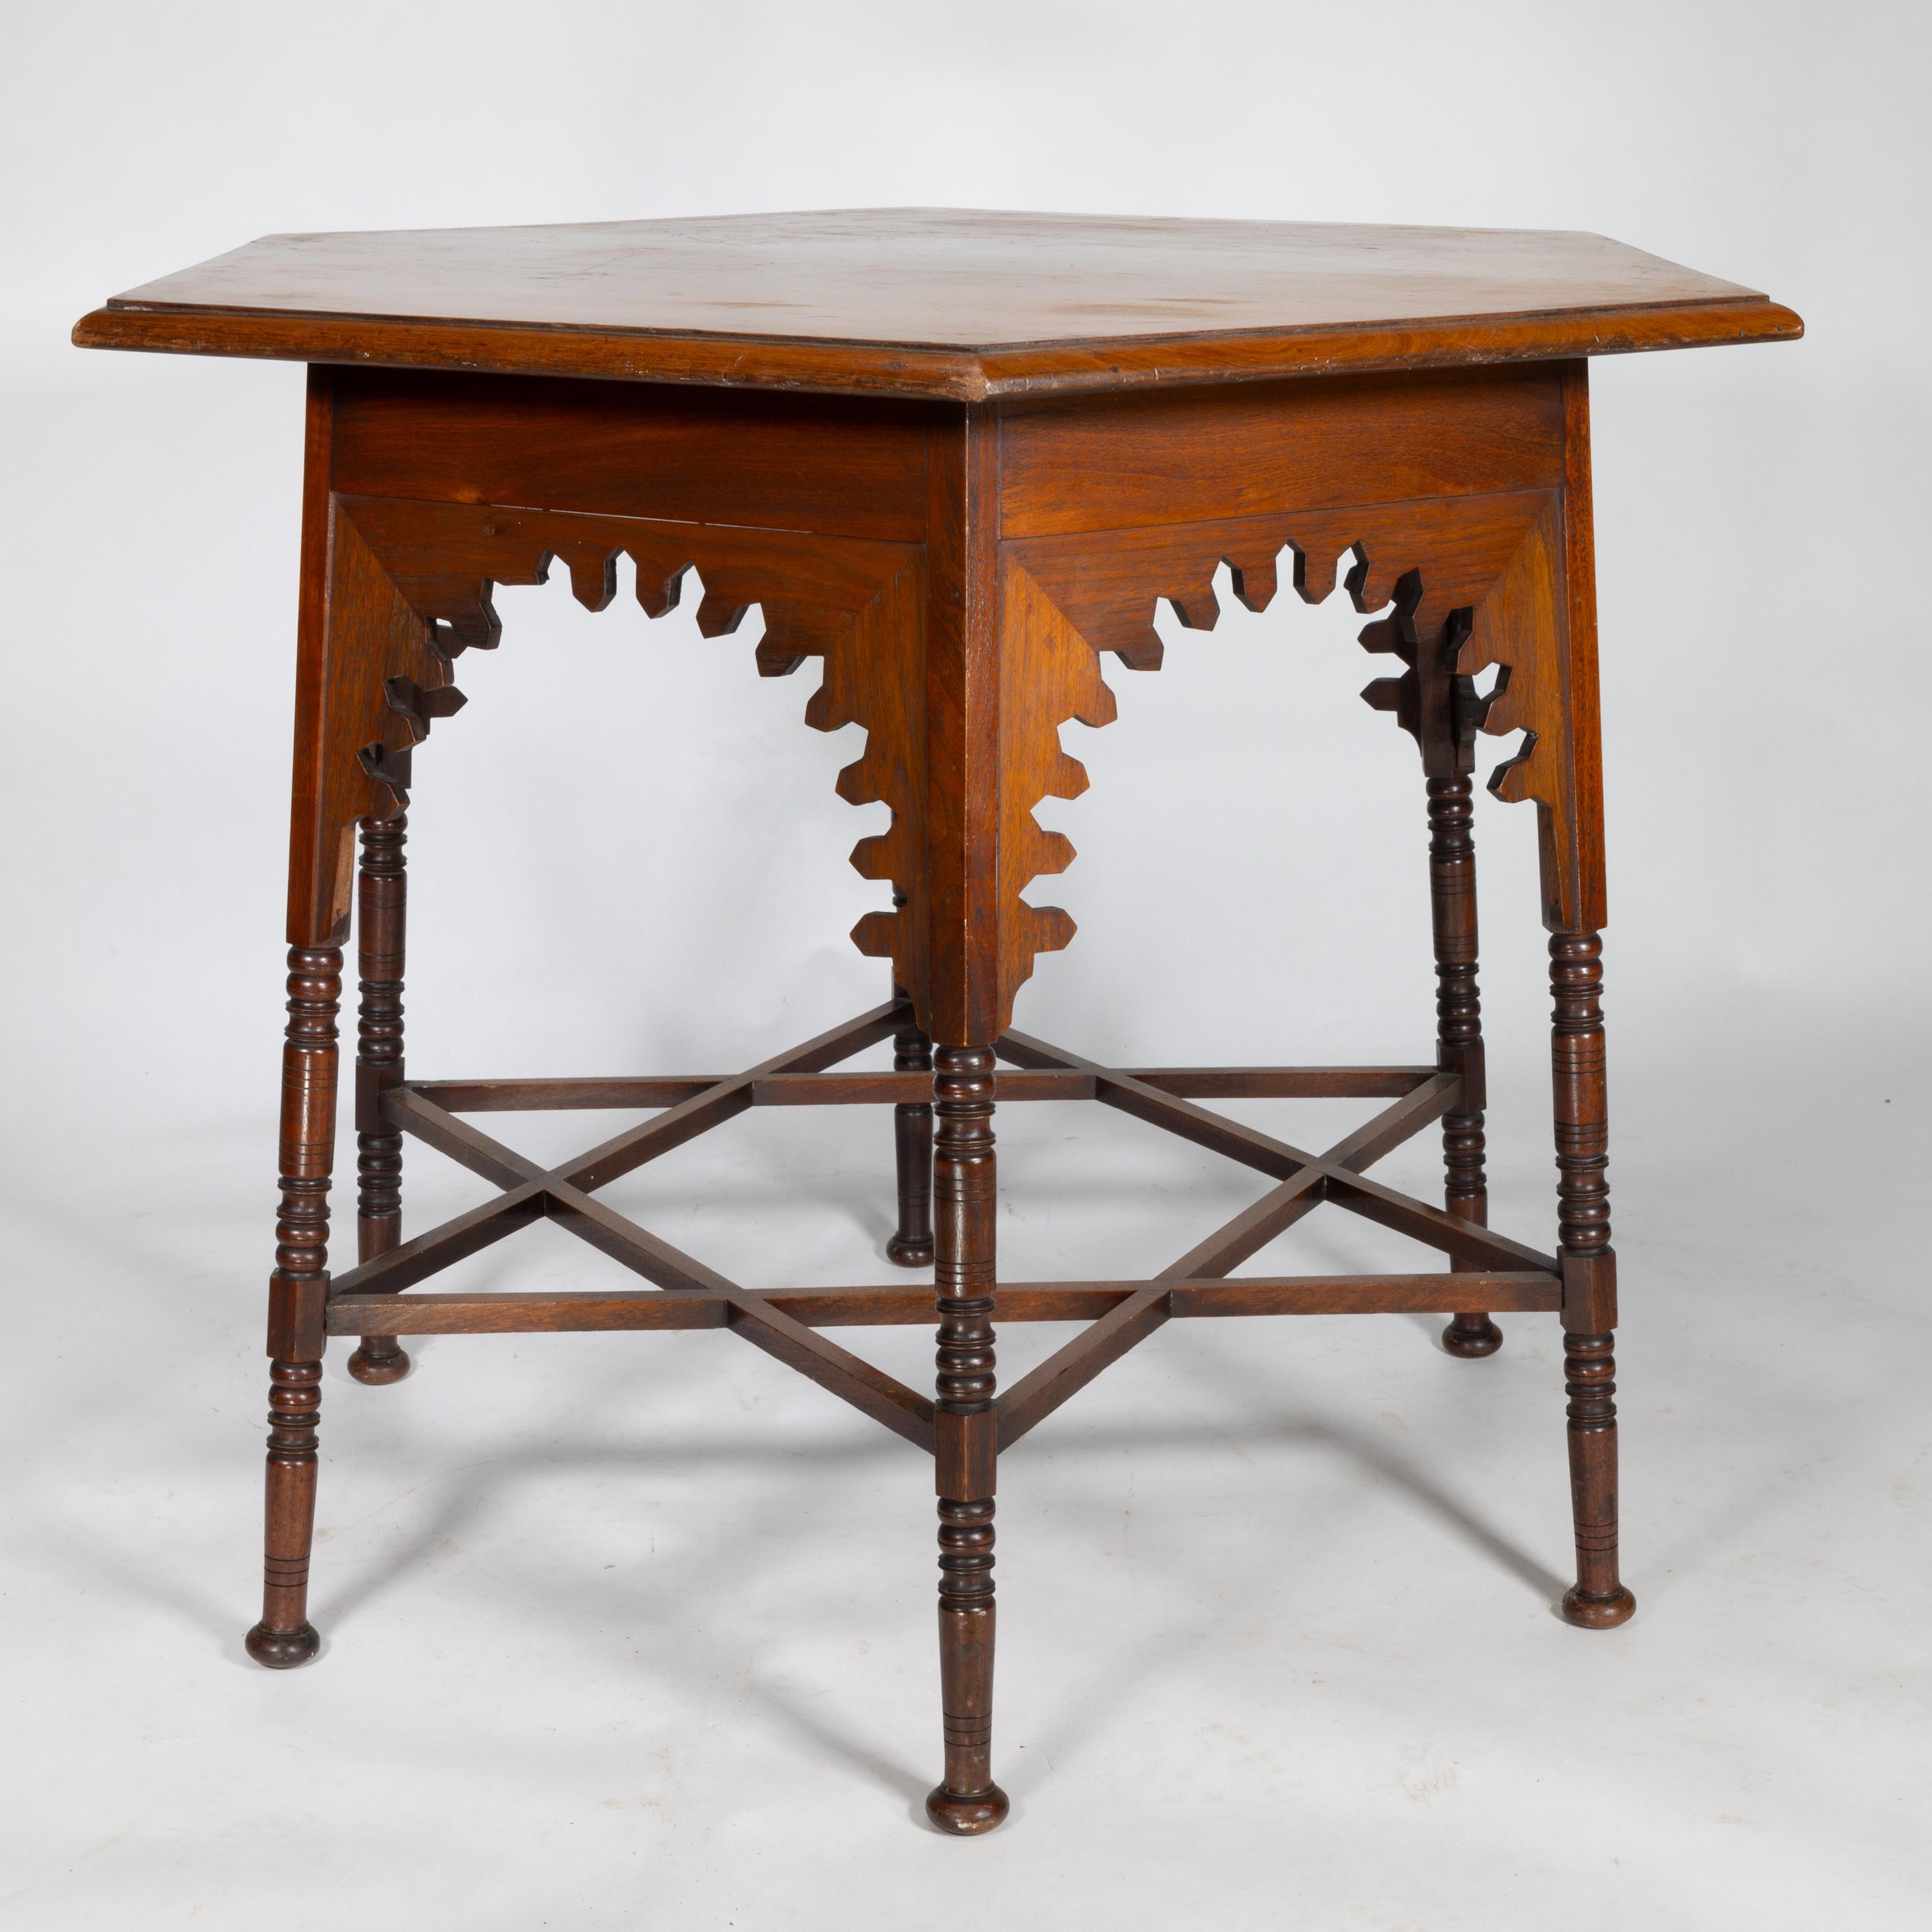 Liberty & Co. An Arts and Crafts walnut centre table with arched apron on ring turned legs united by star shaped stretchers. The period image attached here is variation of the same table taken from Pictorial Dictionary of British 19th Century